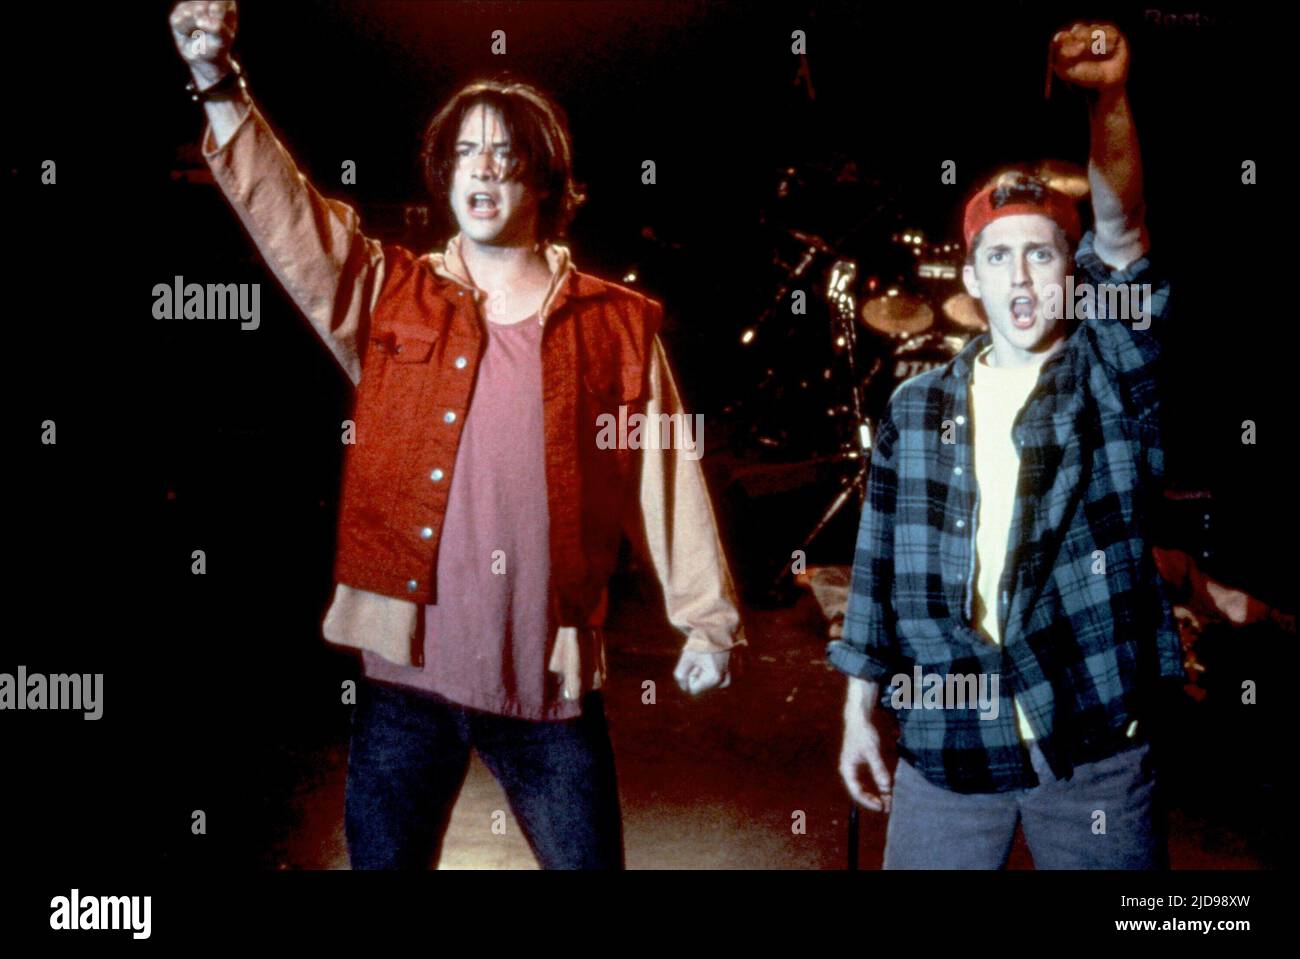 REEVES,WINTER, BILL and TED'S BOGUS JOURNEY, 1991, Stock Photo